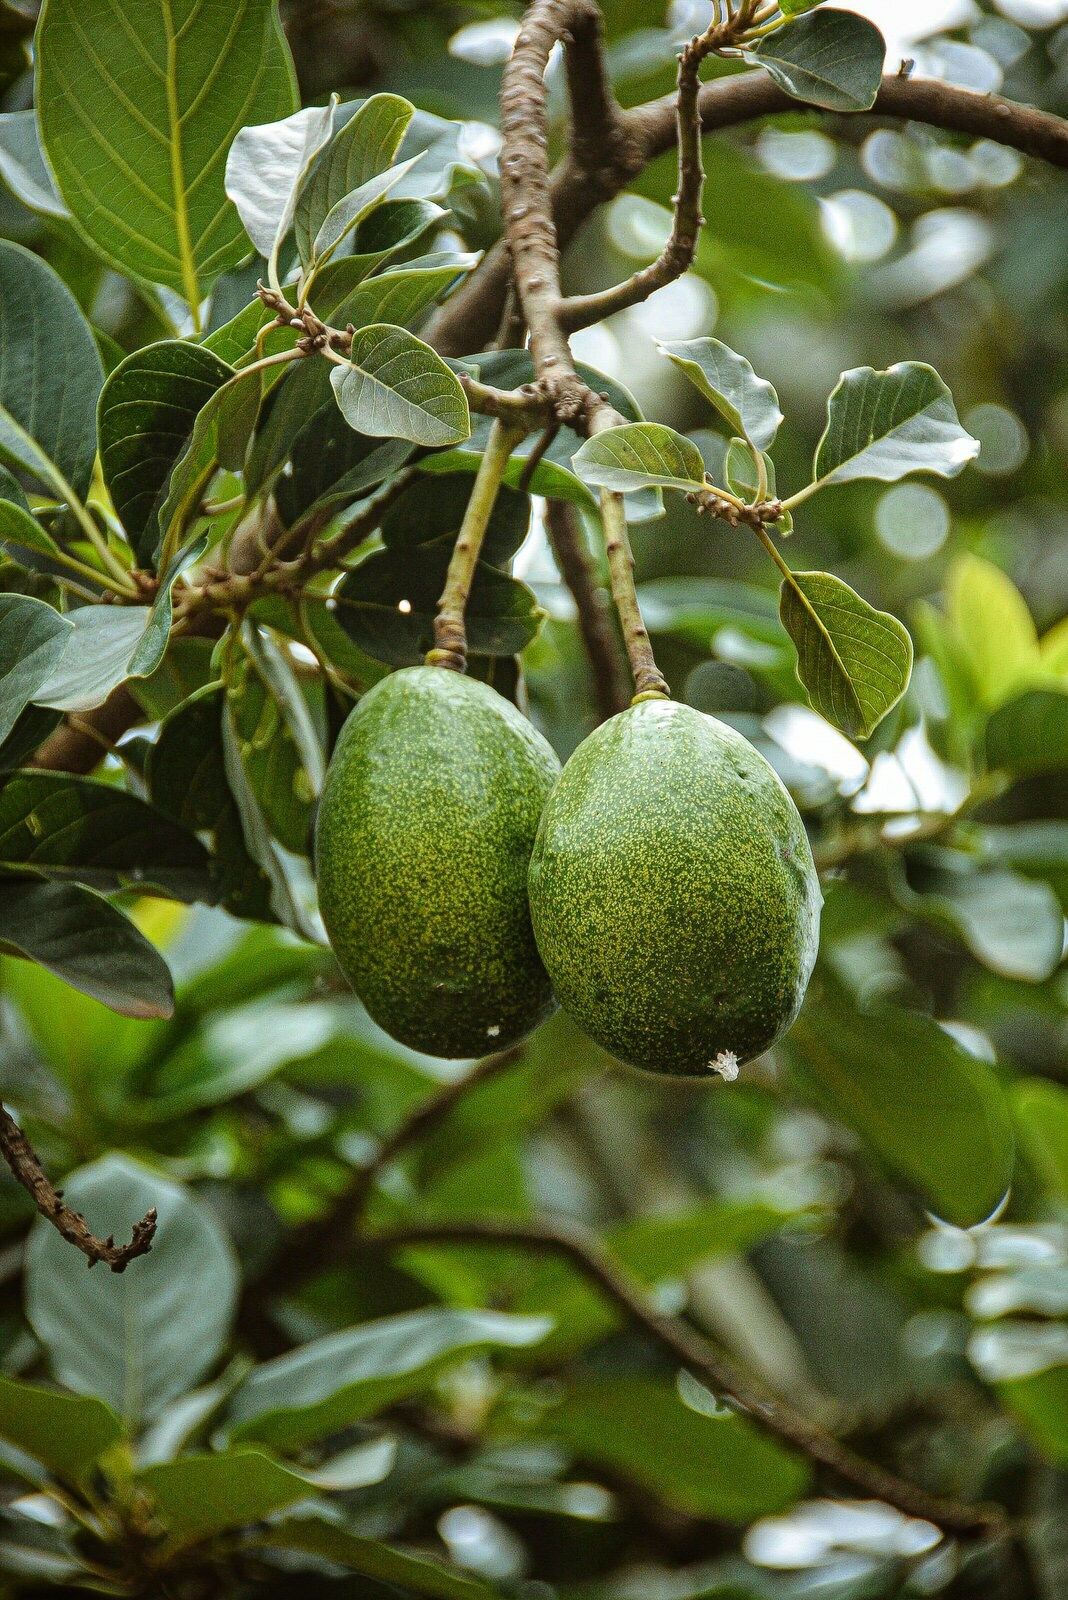 Discover the fascinating world of Kenyan avocados and how they have become one of the top exports in the country. This blog post takes you on a journey through the history of avocado farming in Kenya, the sustainable practices employed by small-scale farmers, and the health benefits of consuming this delicious fruit. You'll also learn about the thriving avocado export market in Kenya and how this has helped to create sustainable livelihoods for farmers while meeting the high demand for avocados on the global market. Whether you're a fan of avocados or simply interested in sustainable agriculture, this blog post is a must-read.